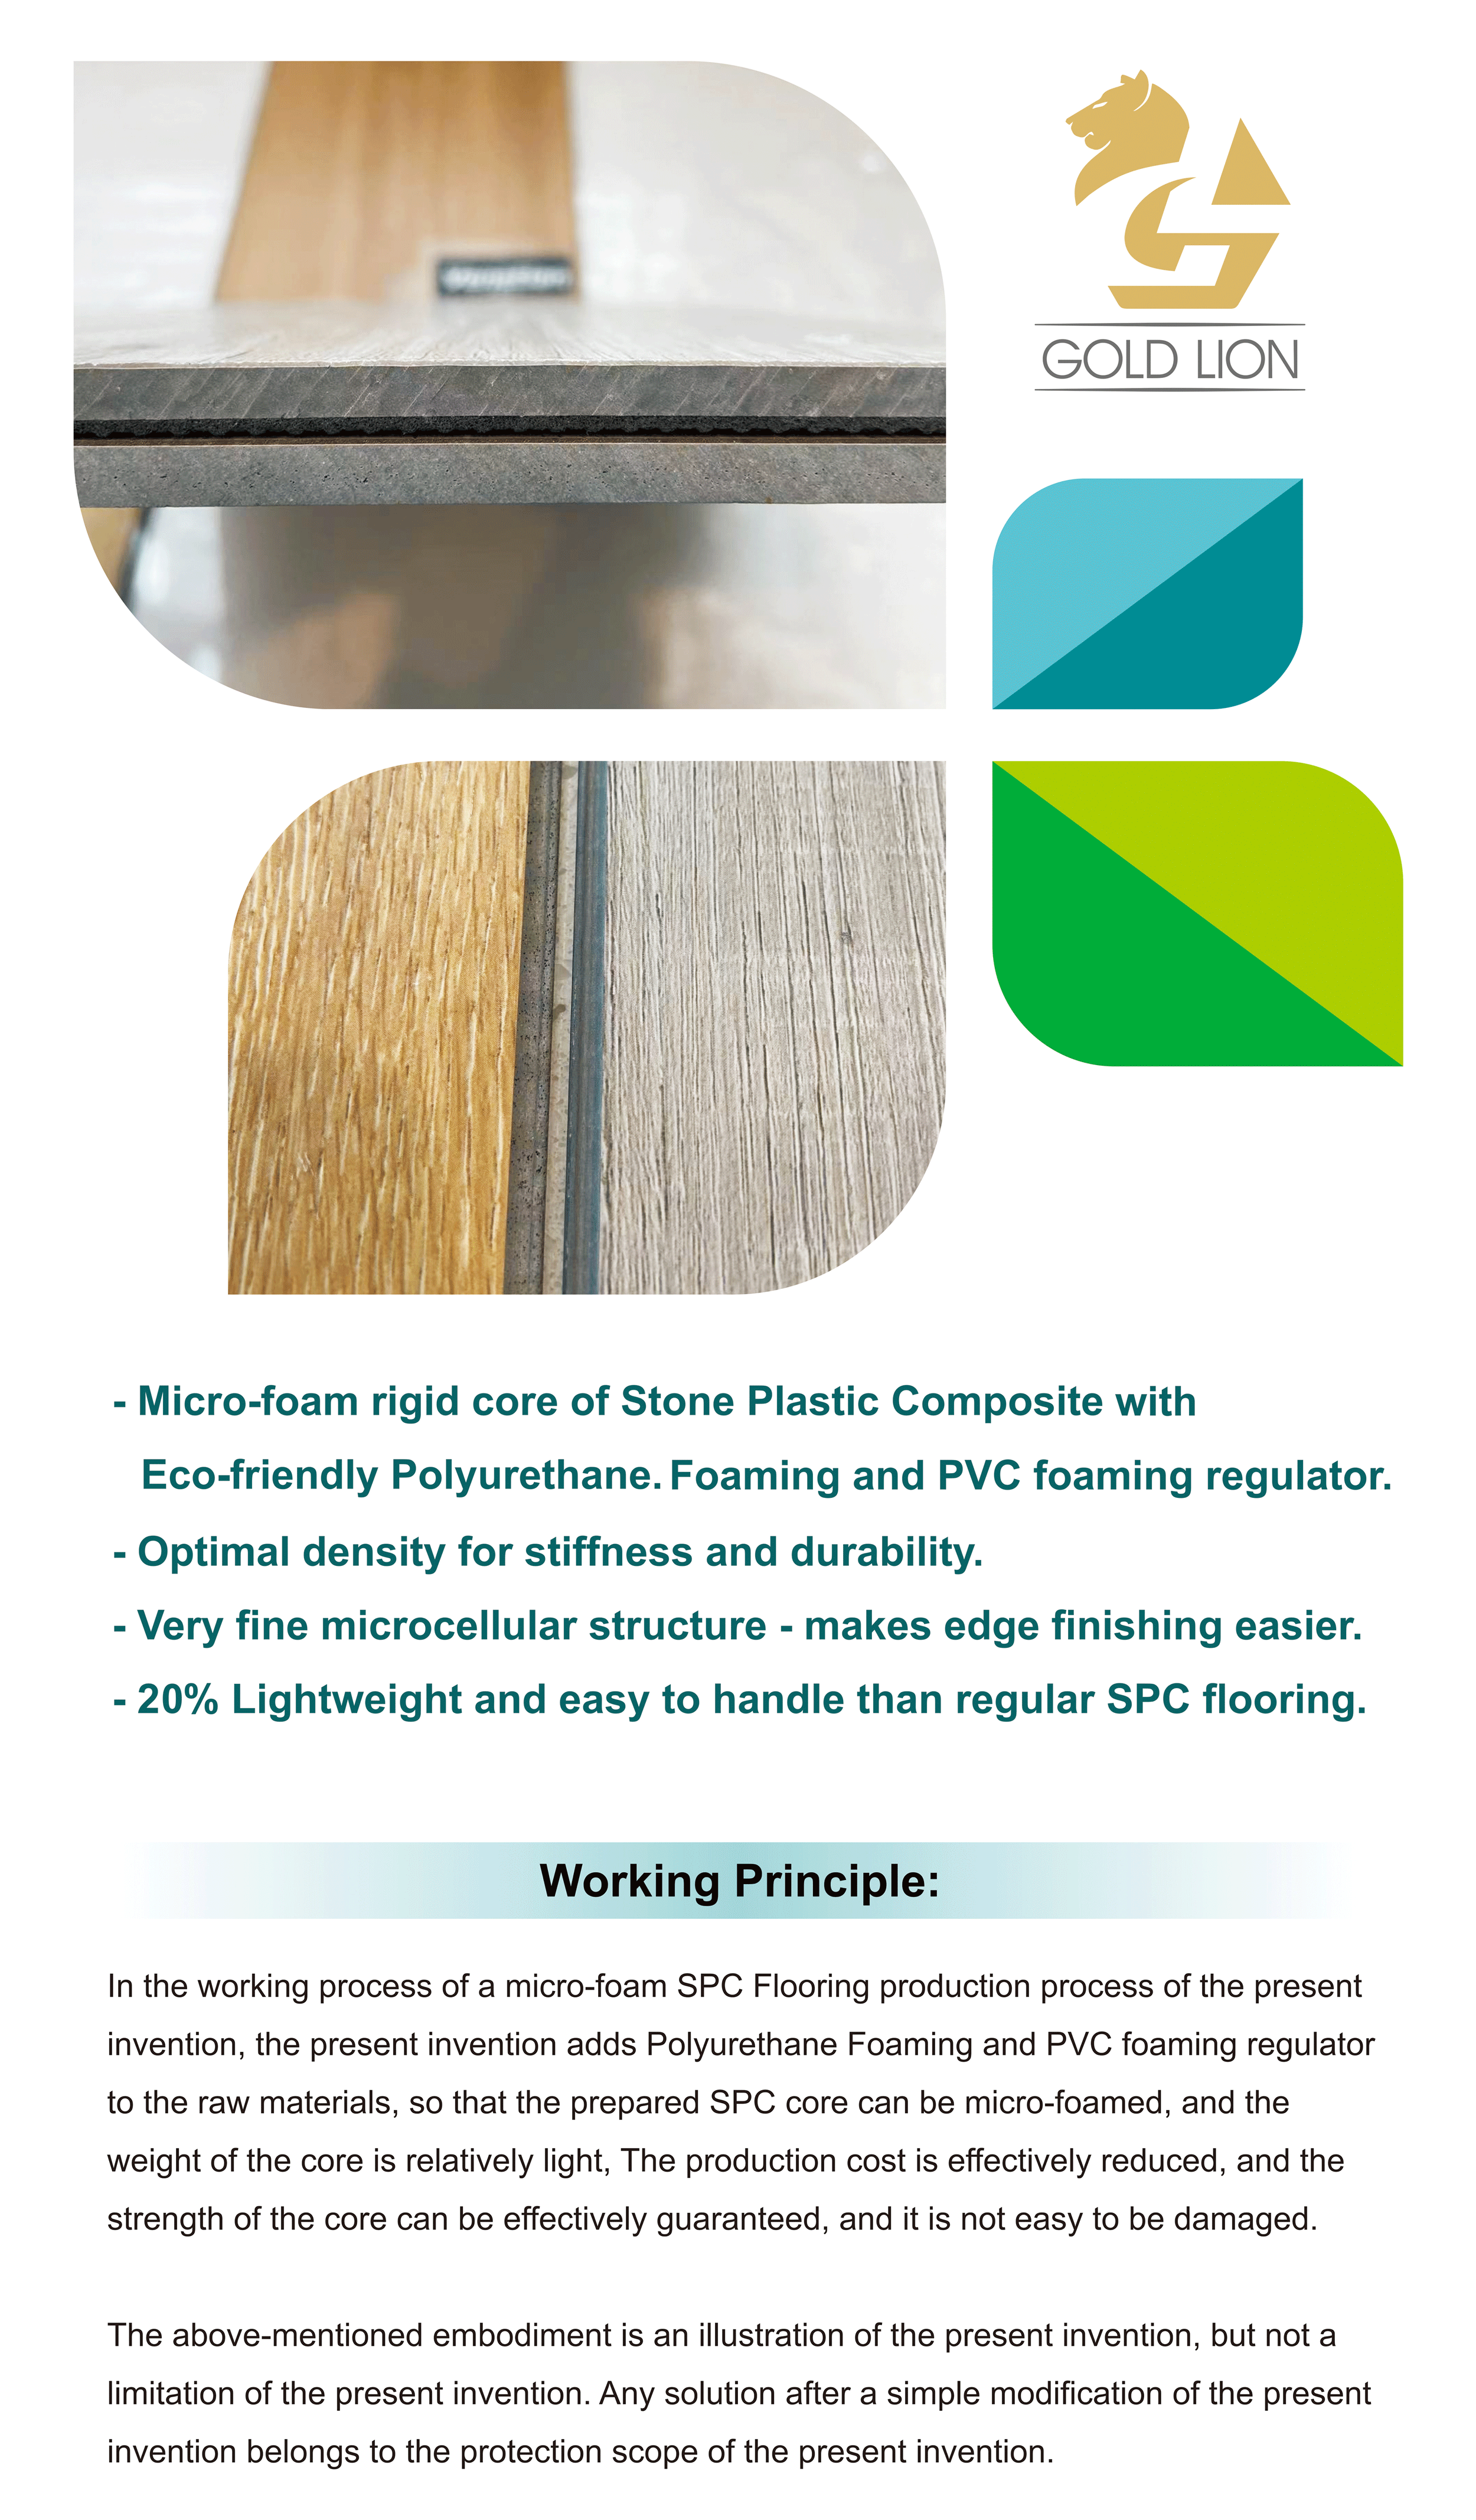 Mirco Foam SPC Flooring - Less Weight and More Loaded